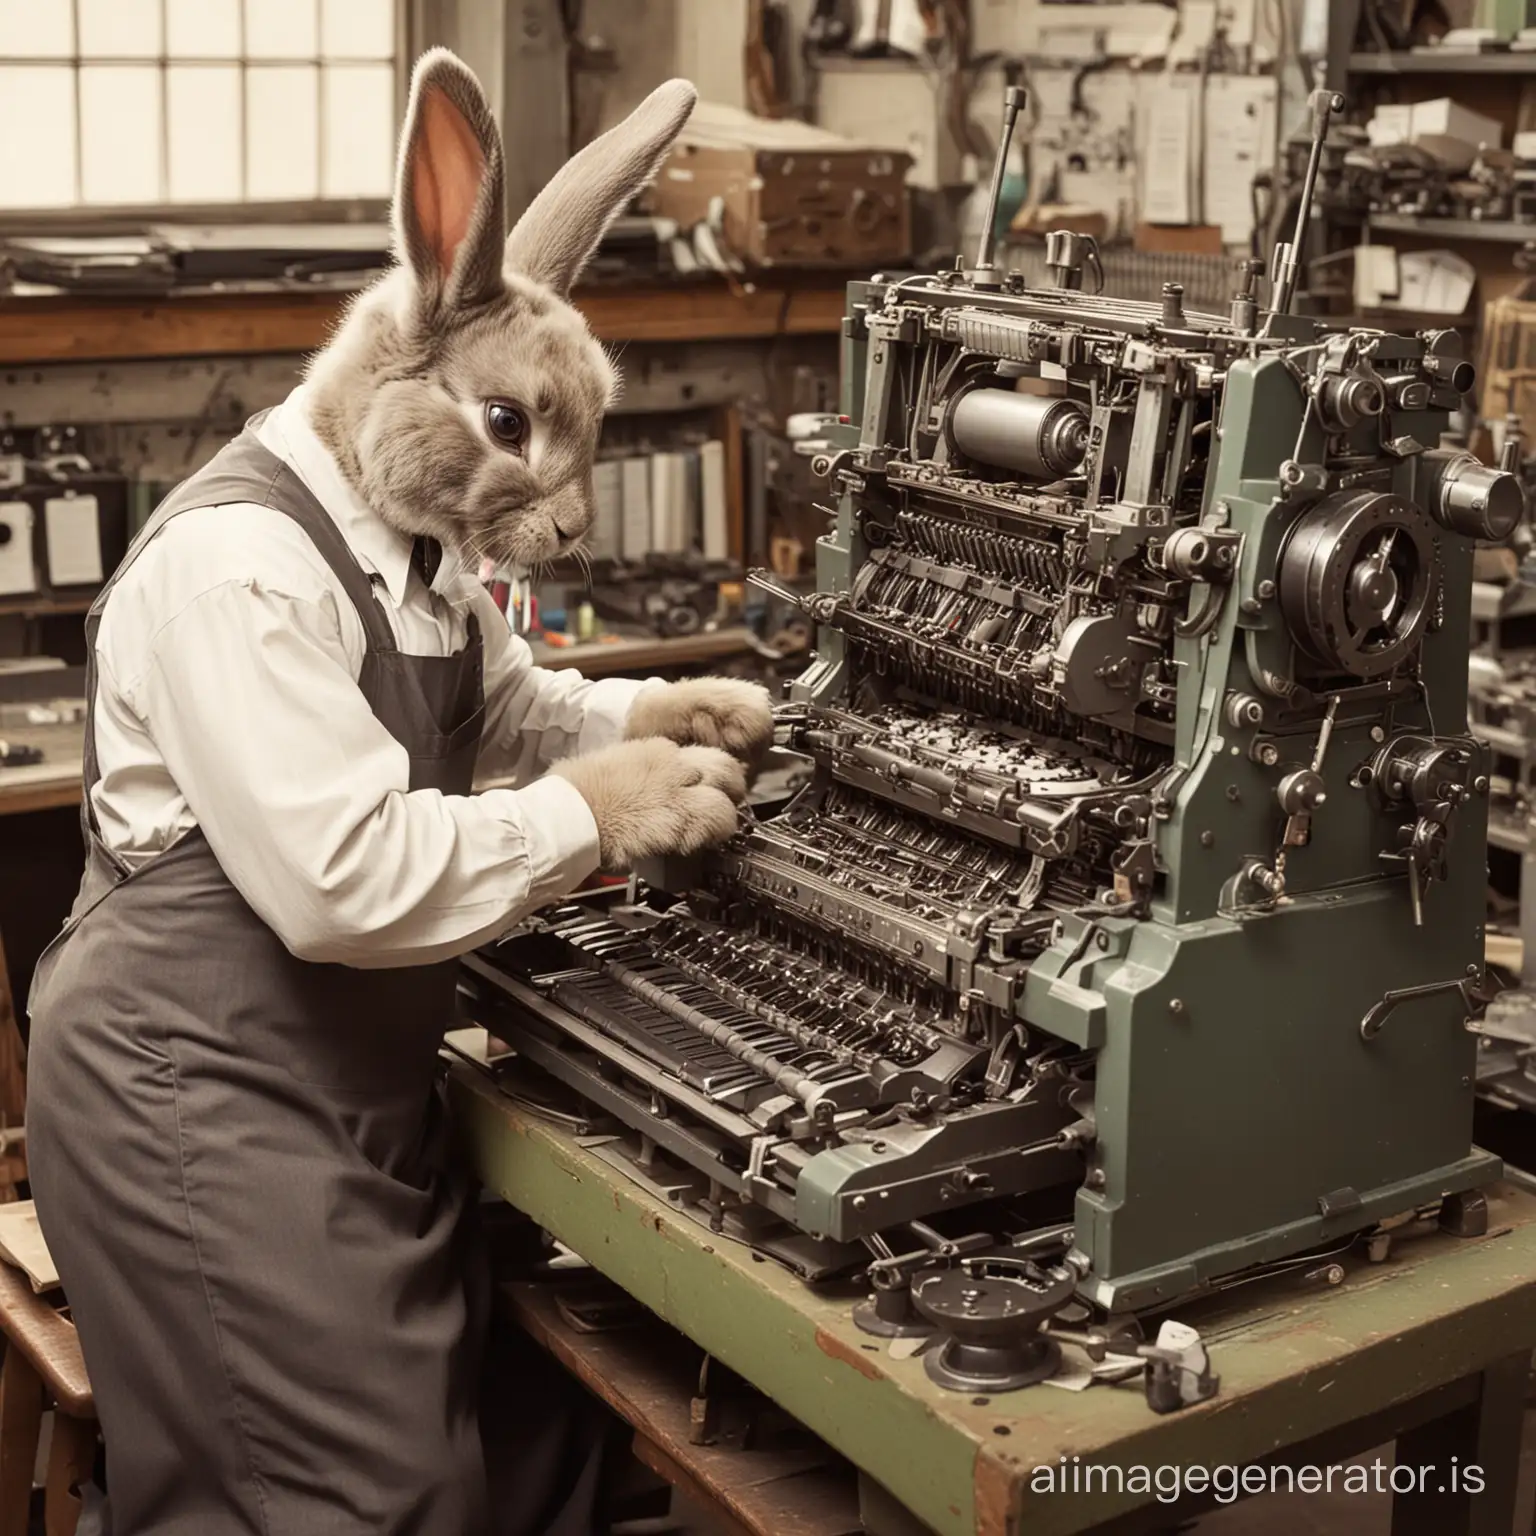 Easter Bunny working on a typesetting machine in the typesetting shop